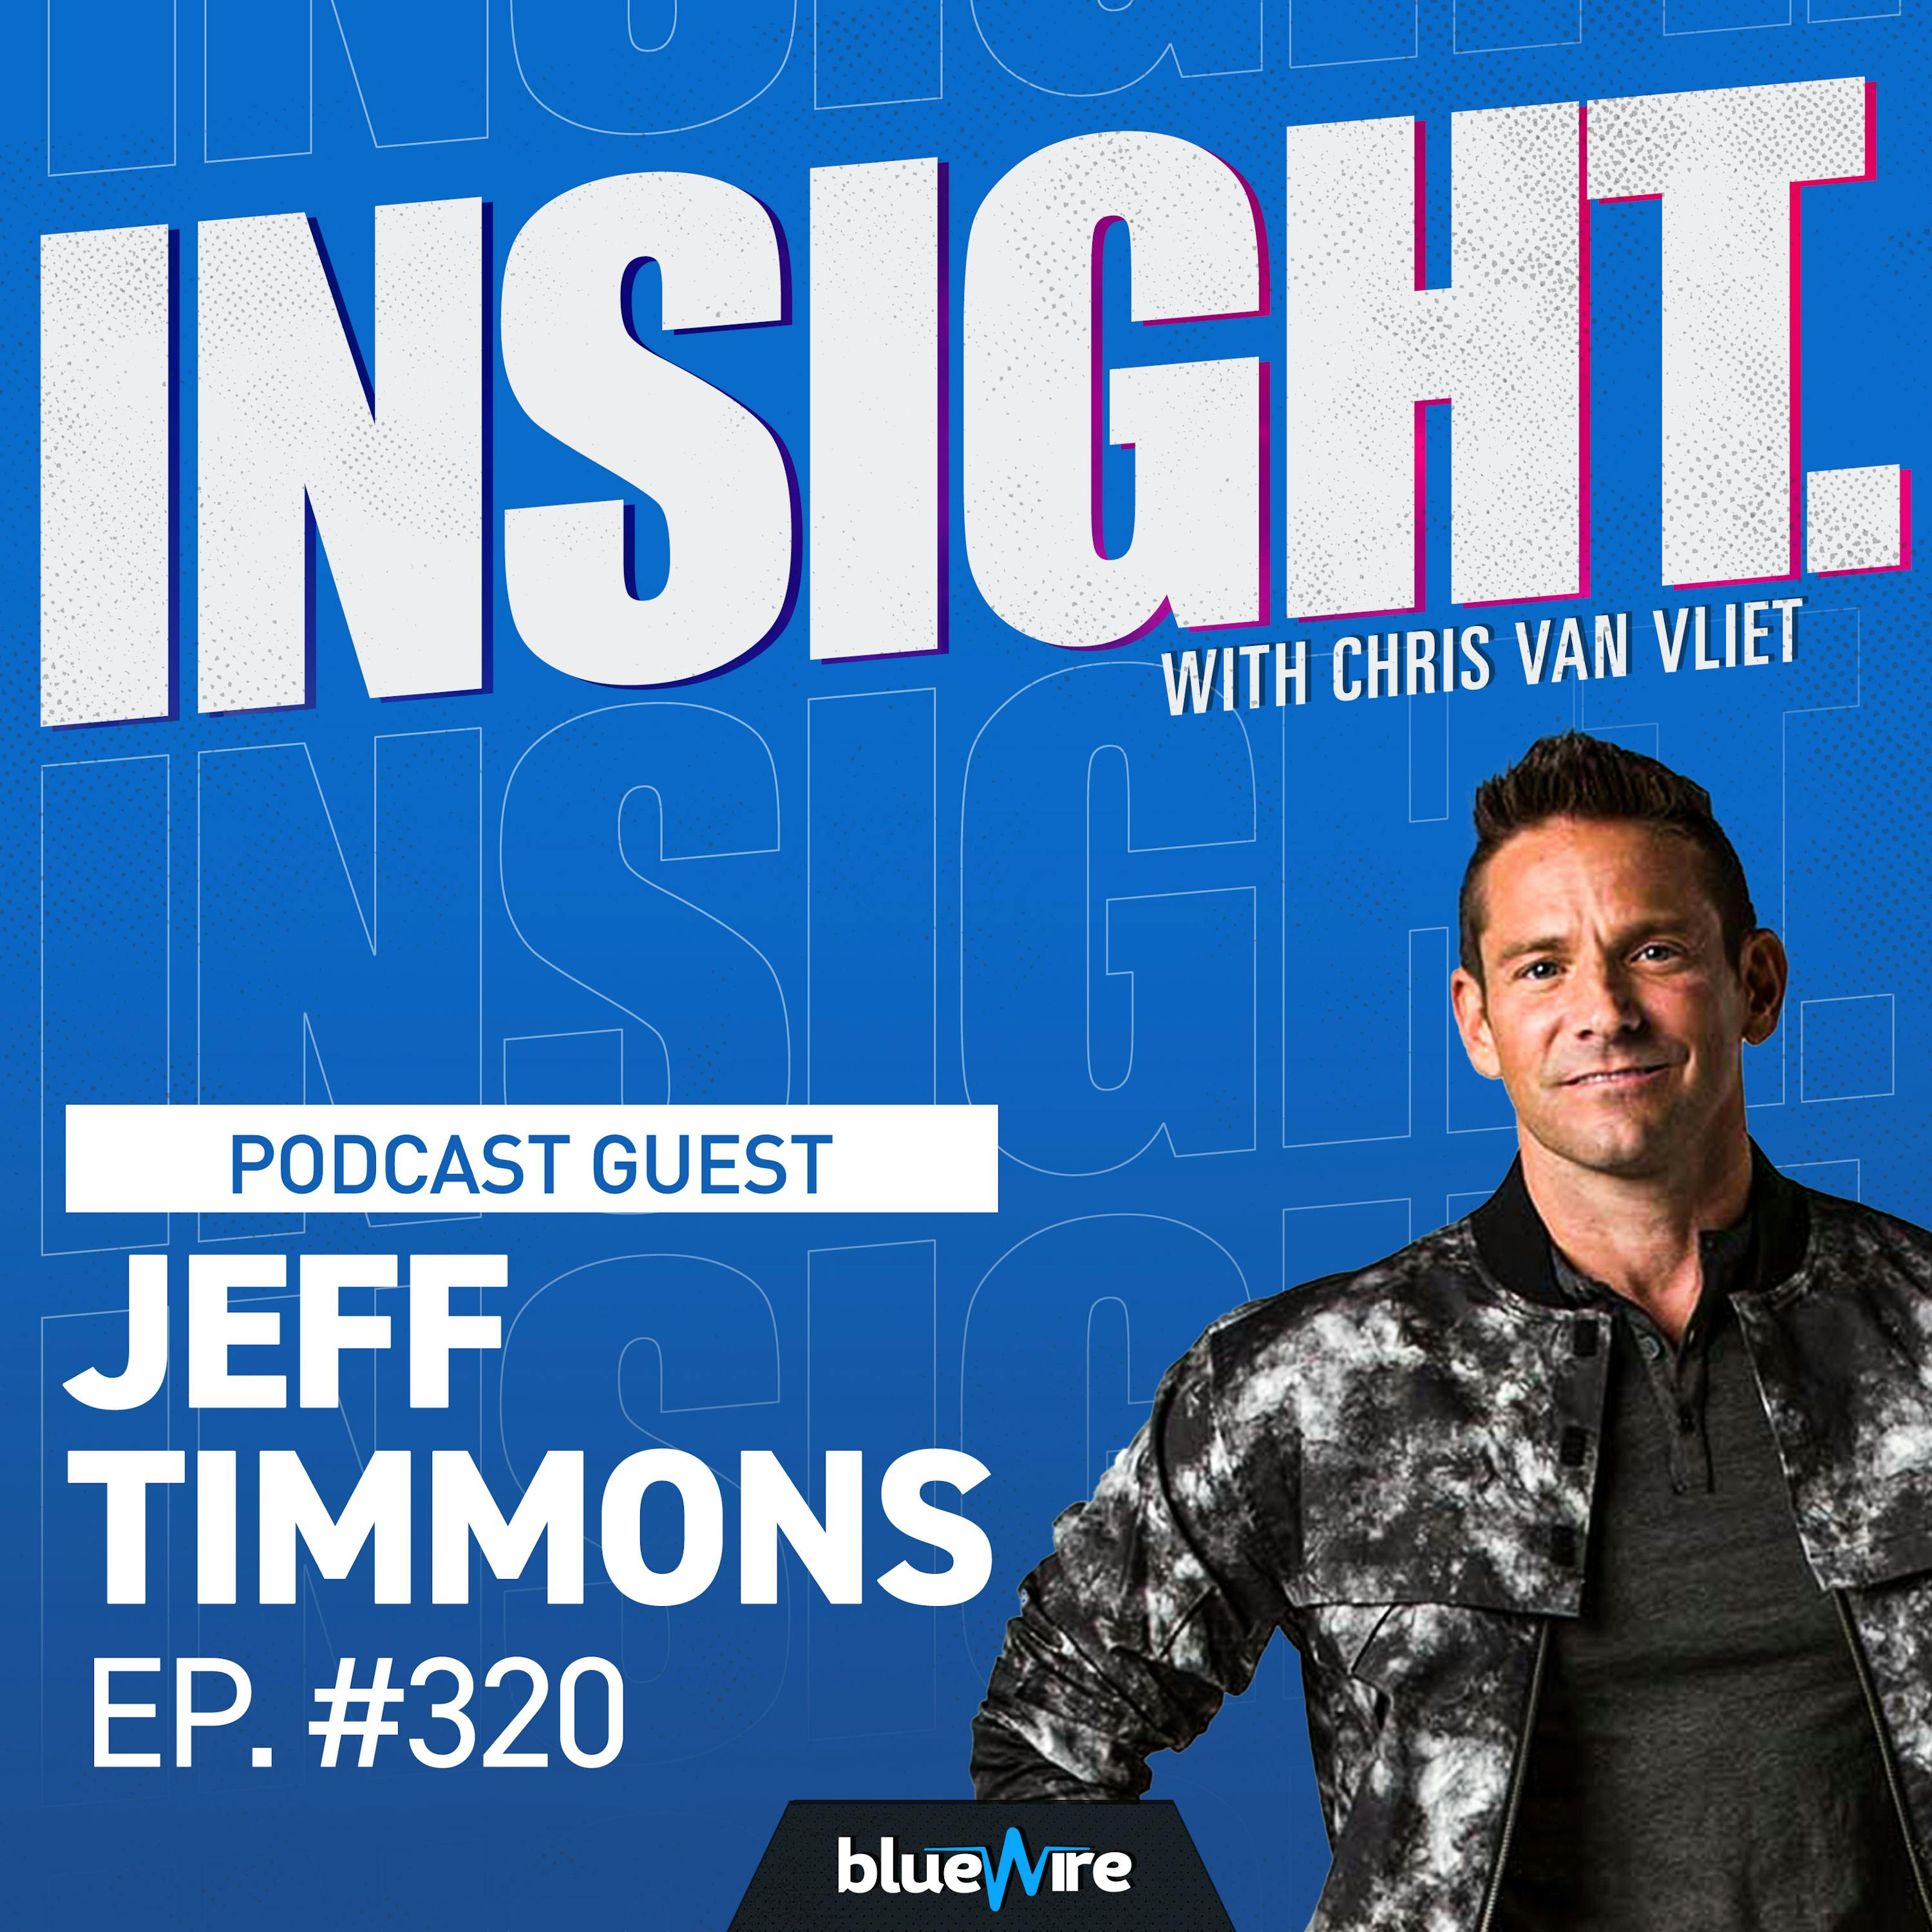 Jeff Timmons From 98 Degrees On The Power of Writing Down Goals And Why You Should DREAM BIG